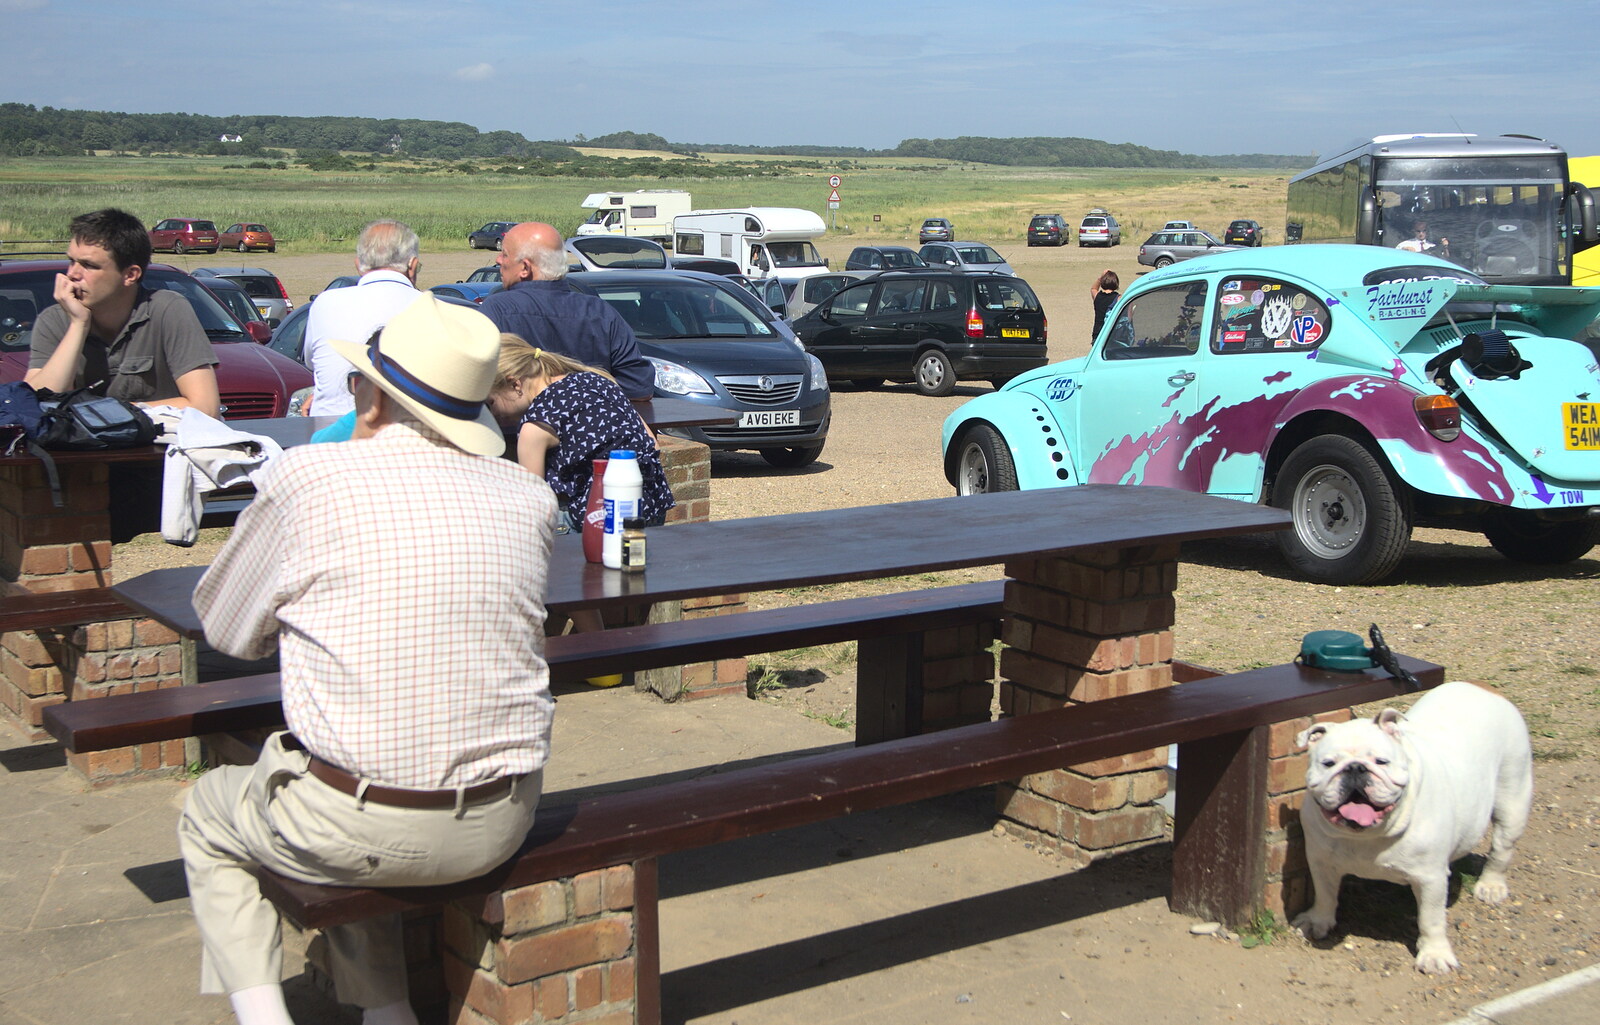 A hot-rod Beetle and a chunky dog from Camping by the Seaside, Cliff House, Dunwich, Suffolk - 15th August 2012